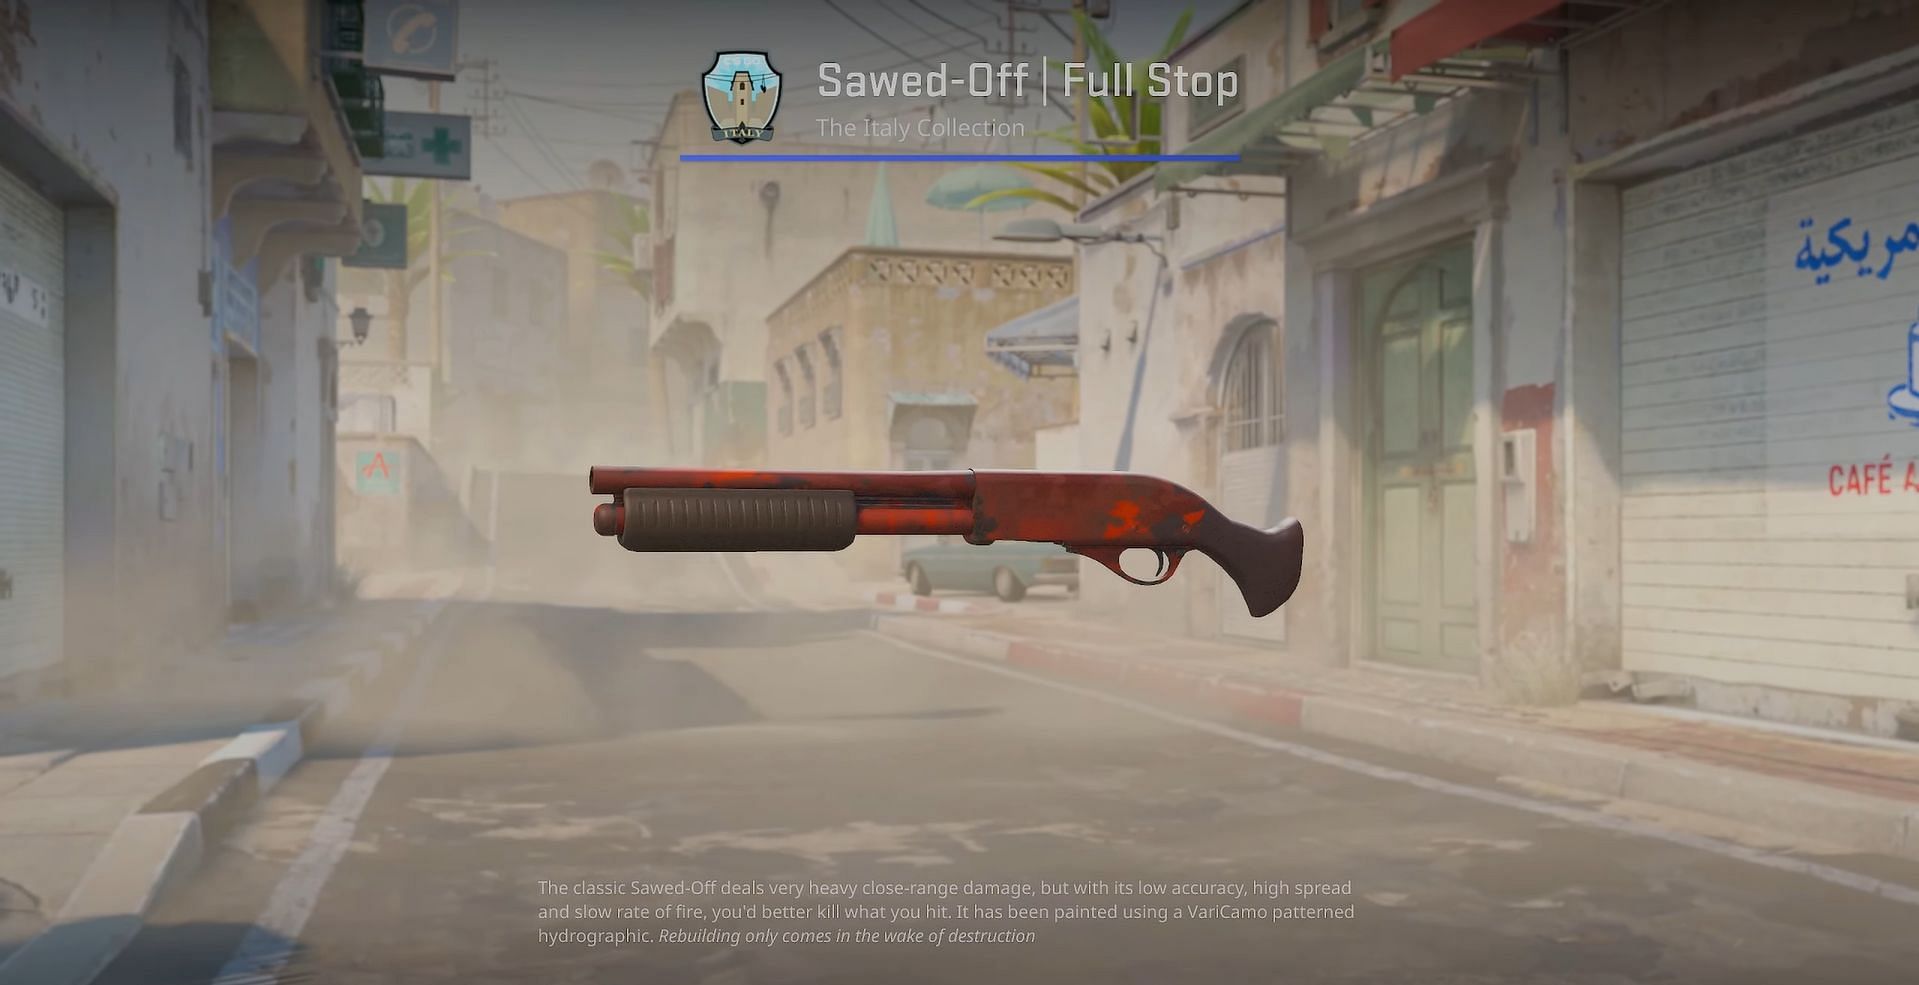 Sawed-Off Full Stop (Image via Valve || YouTube/covernant)